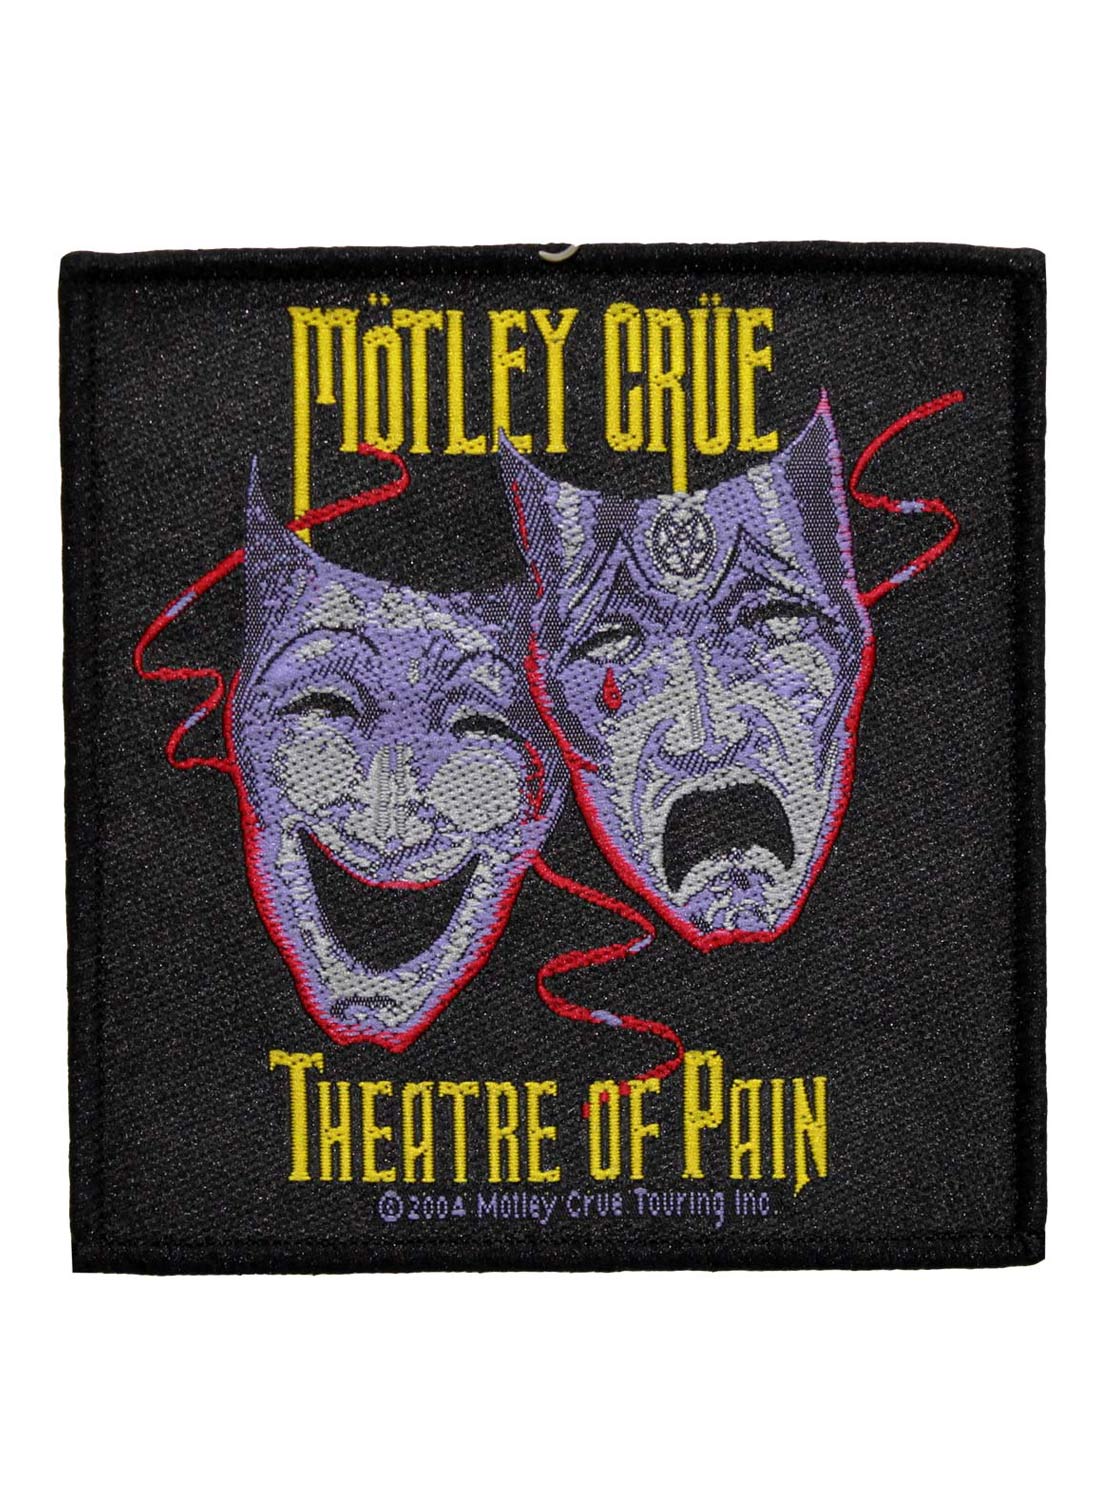 Mötley Crue Theatre of Pain Patch